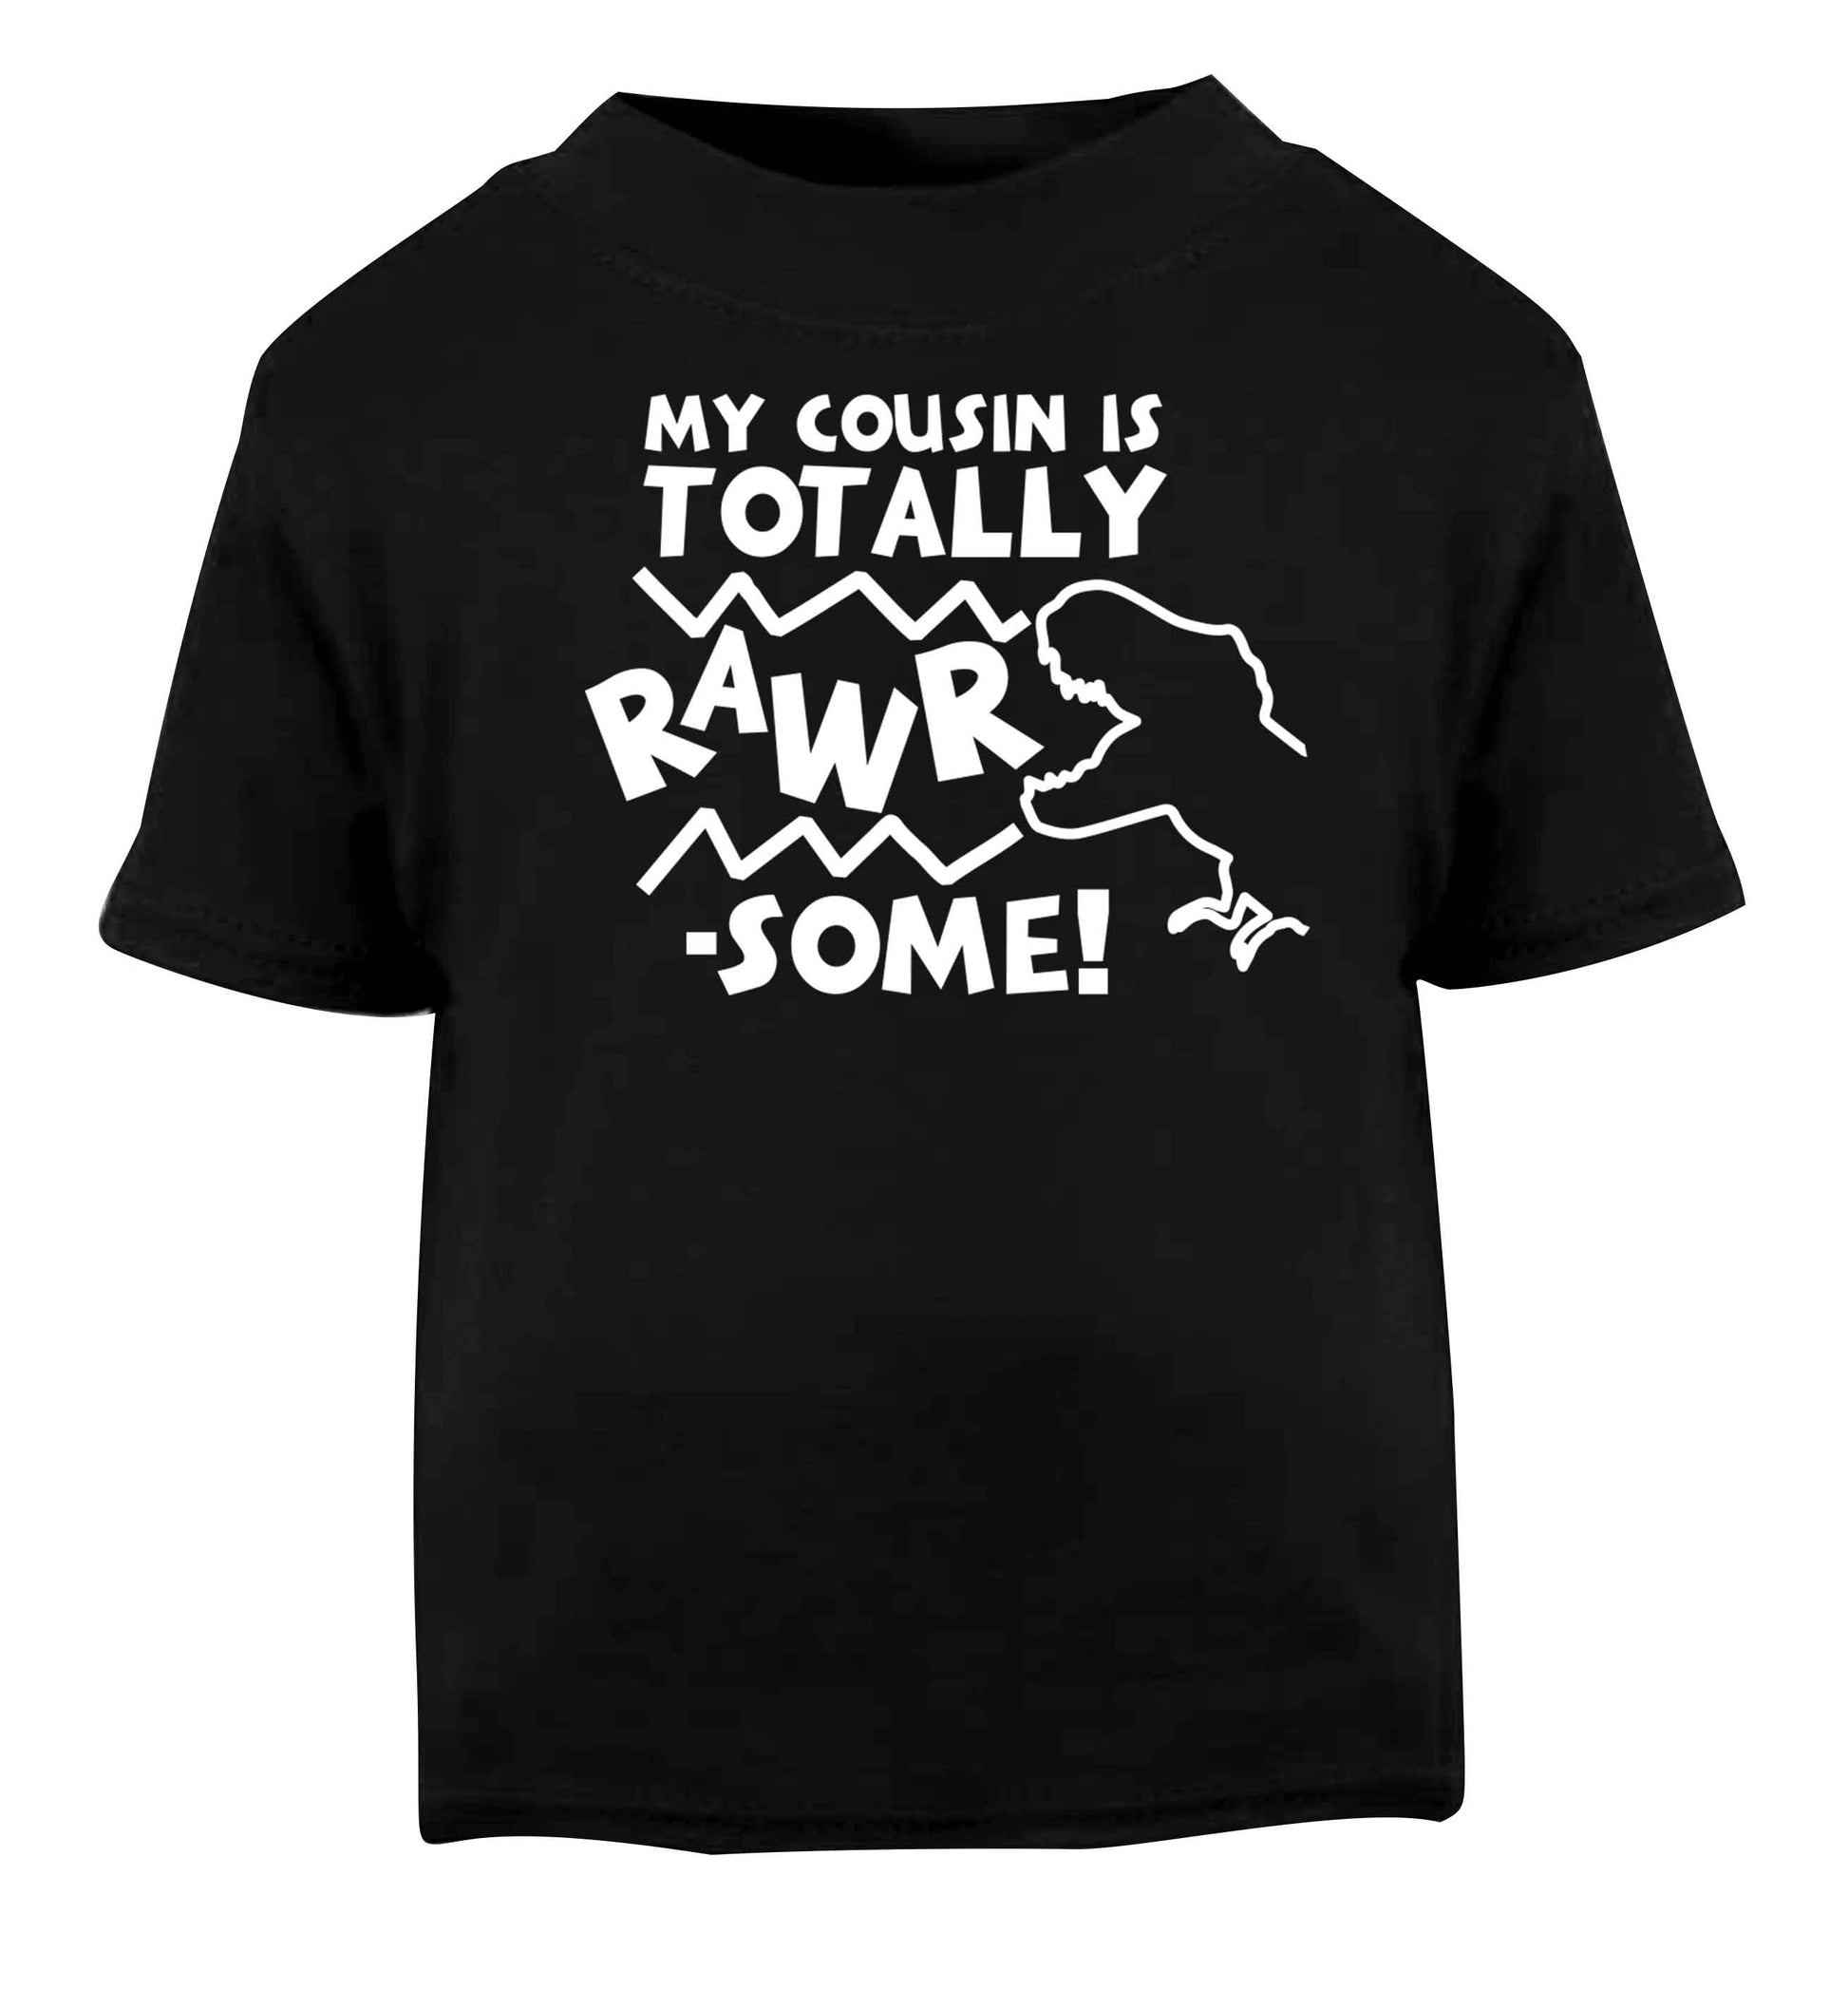 My cousin is totally rawrsome Black baby toddler Tshirt 2 years